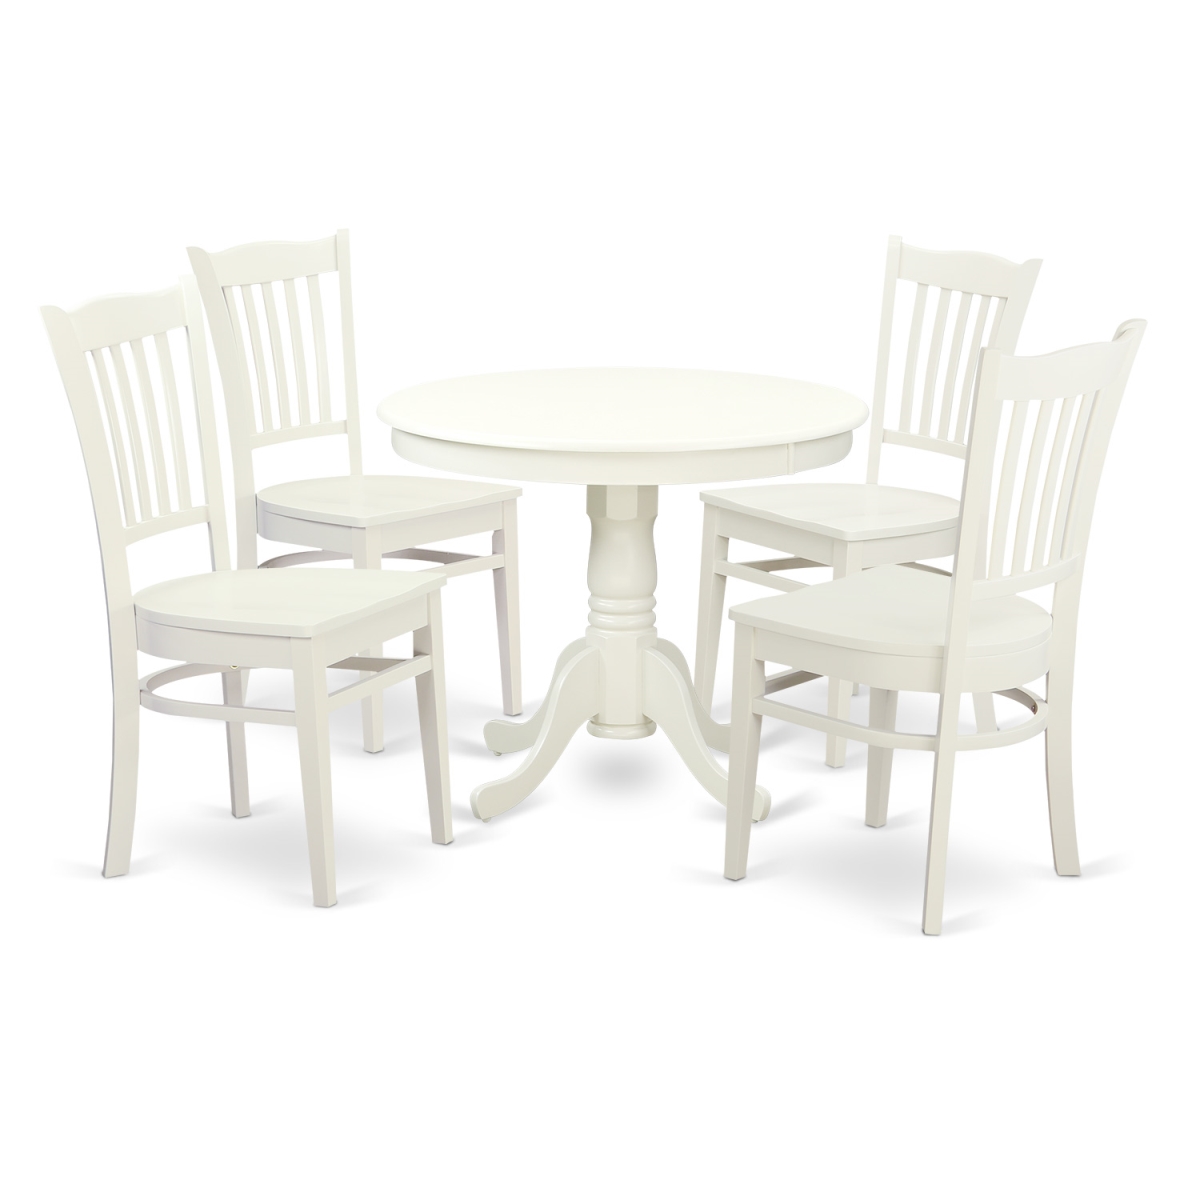 Picture of East West Furniture ANGR5-LWH-W Dining Set - One Kitchen Table & Four Wood Seat Chairs, Linen White - 5 Piece